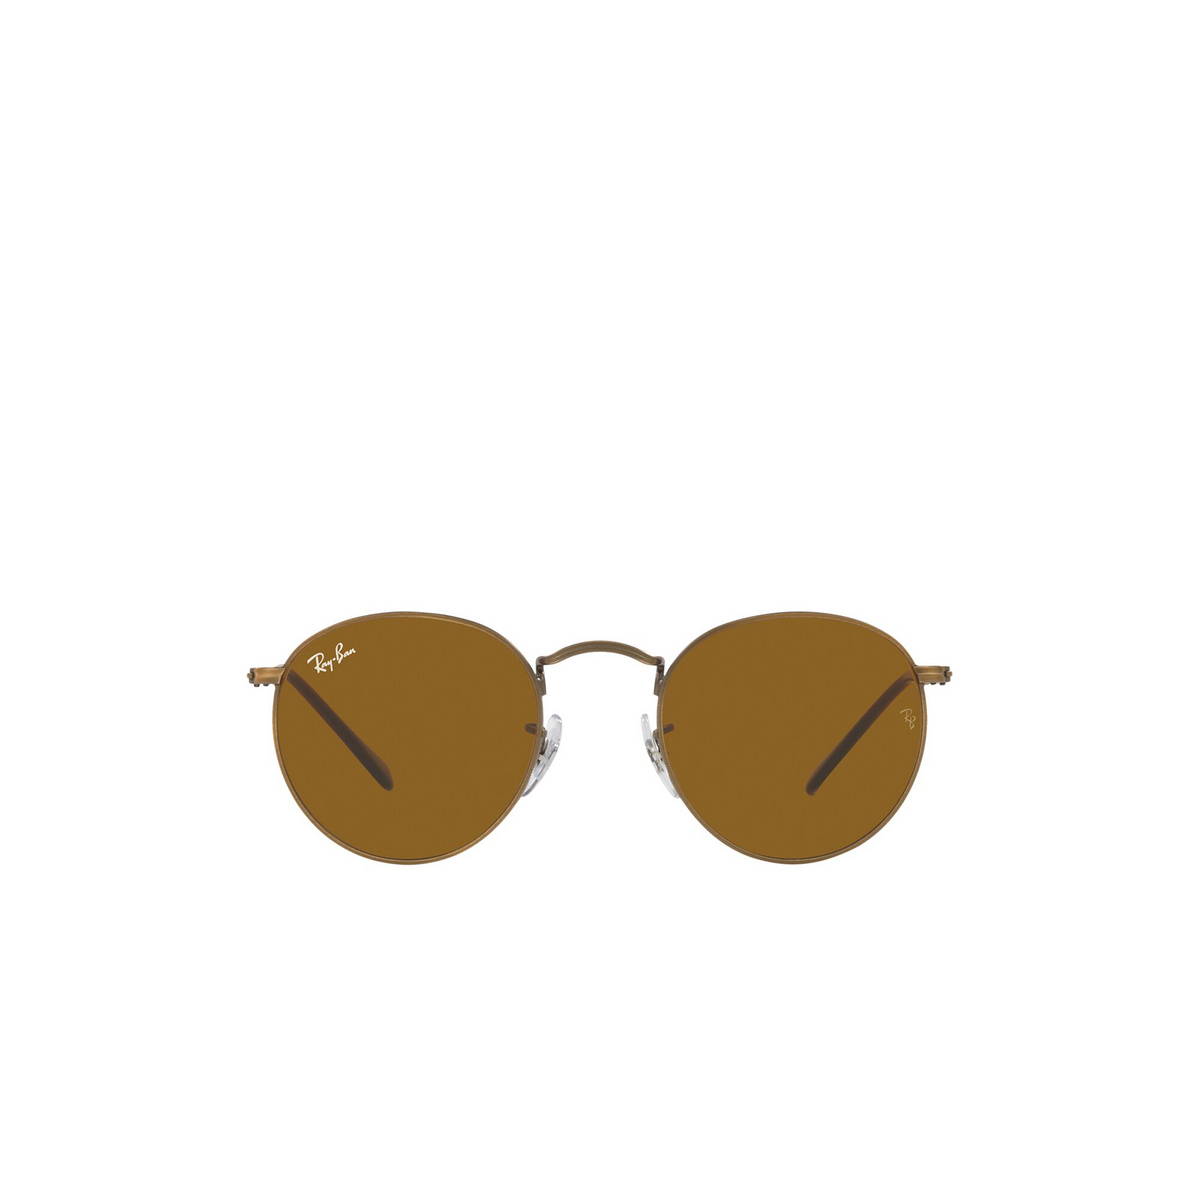 Ray-Ban ROUND METAL Sunglasses 922833 Antique Gold - front view